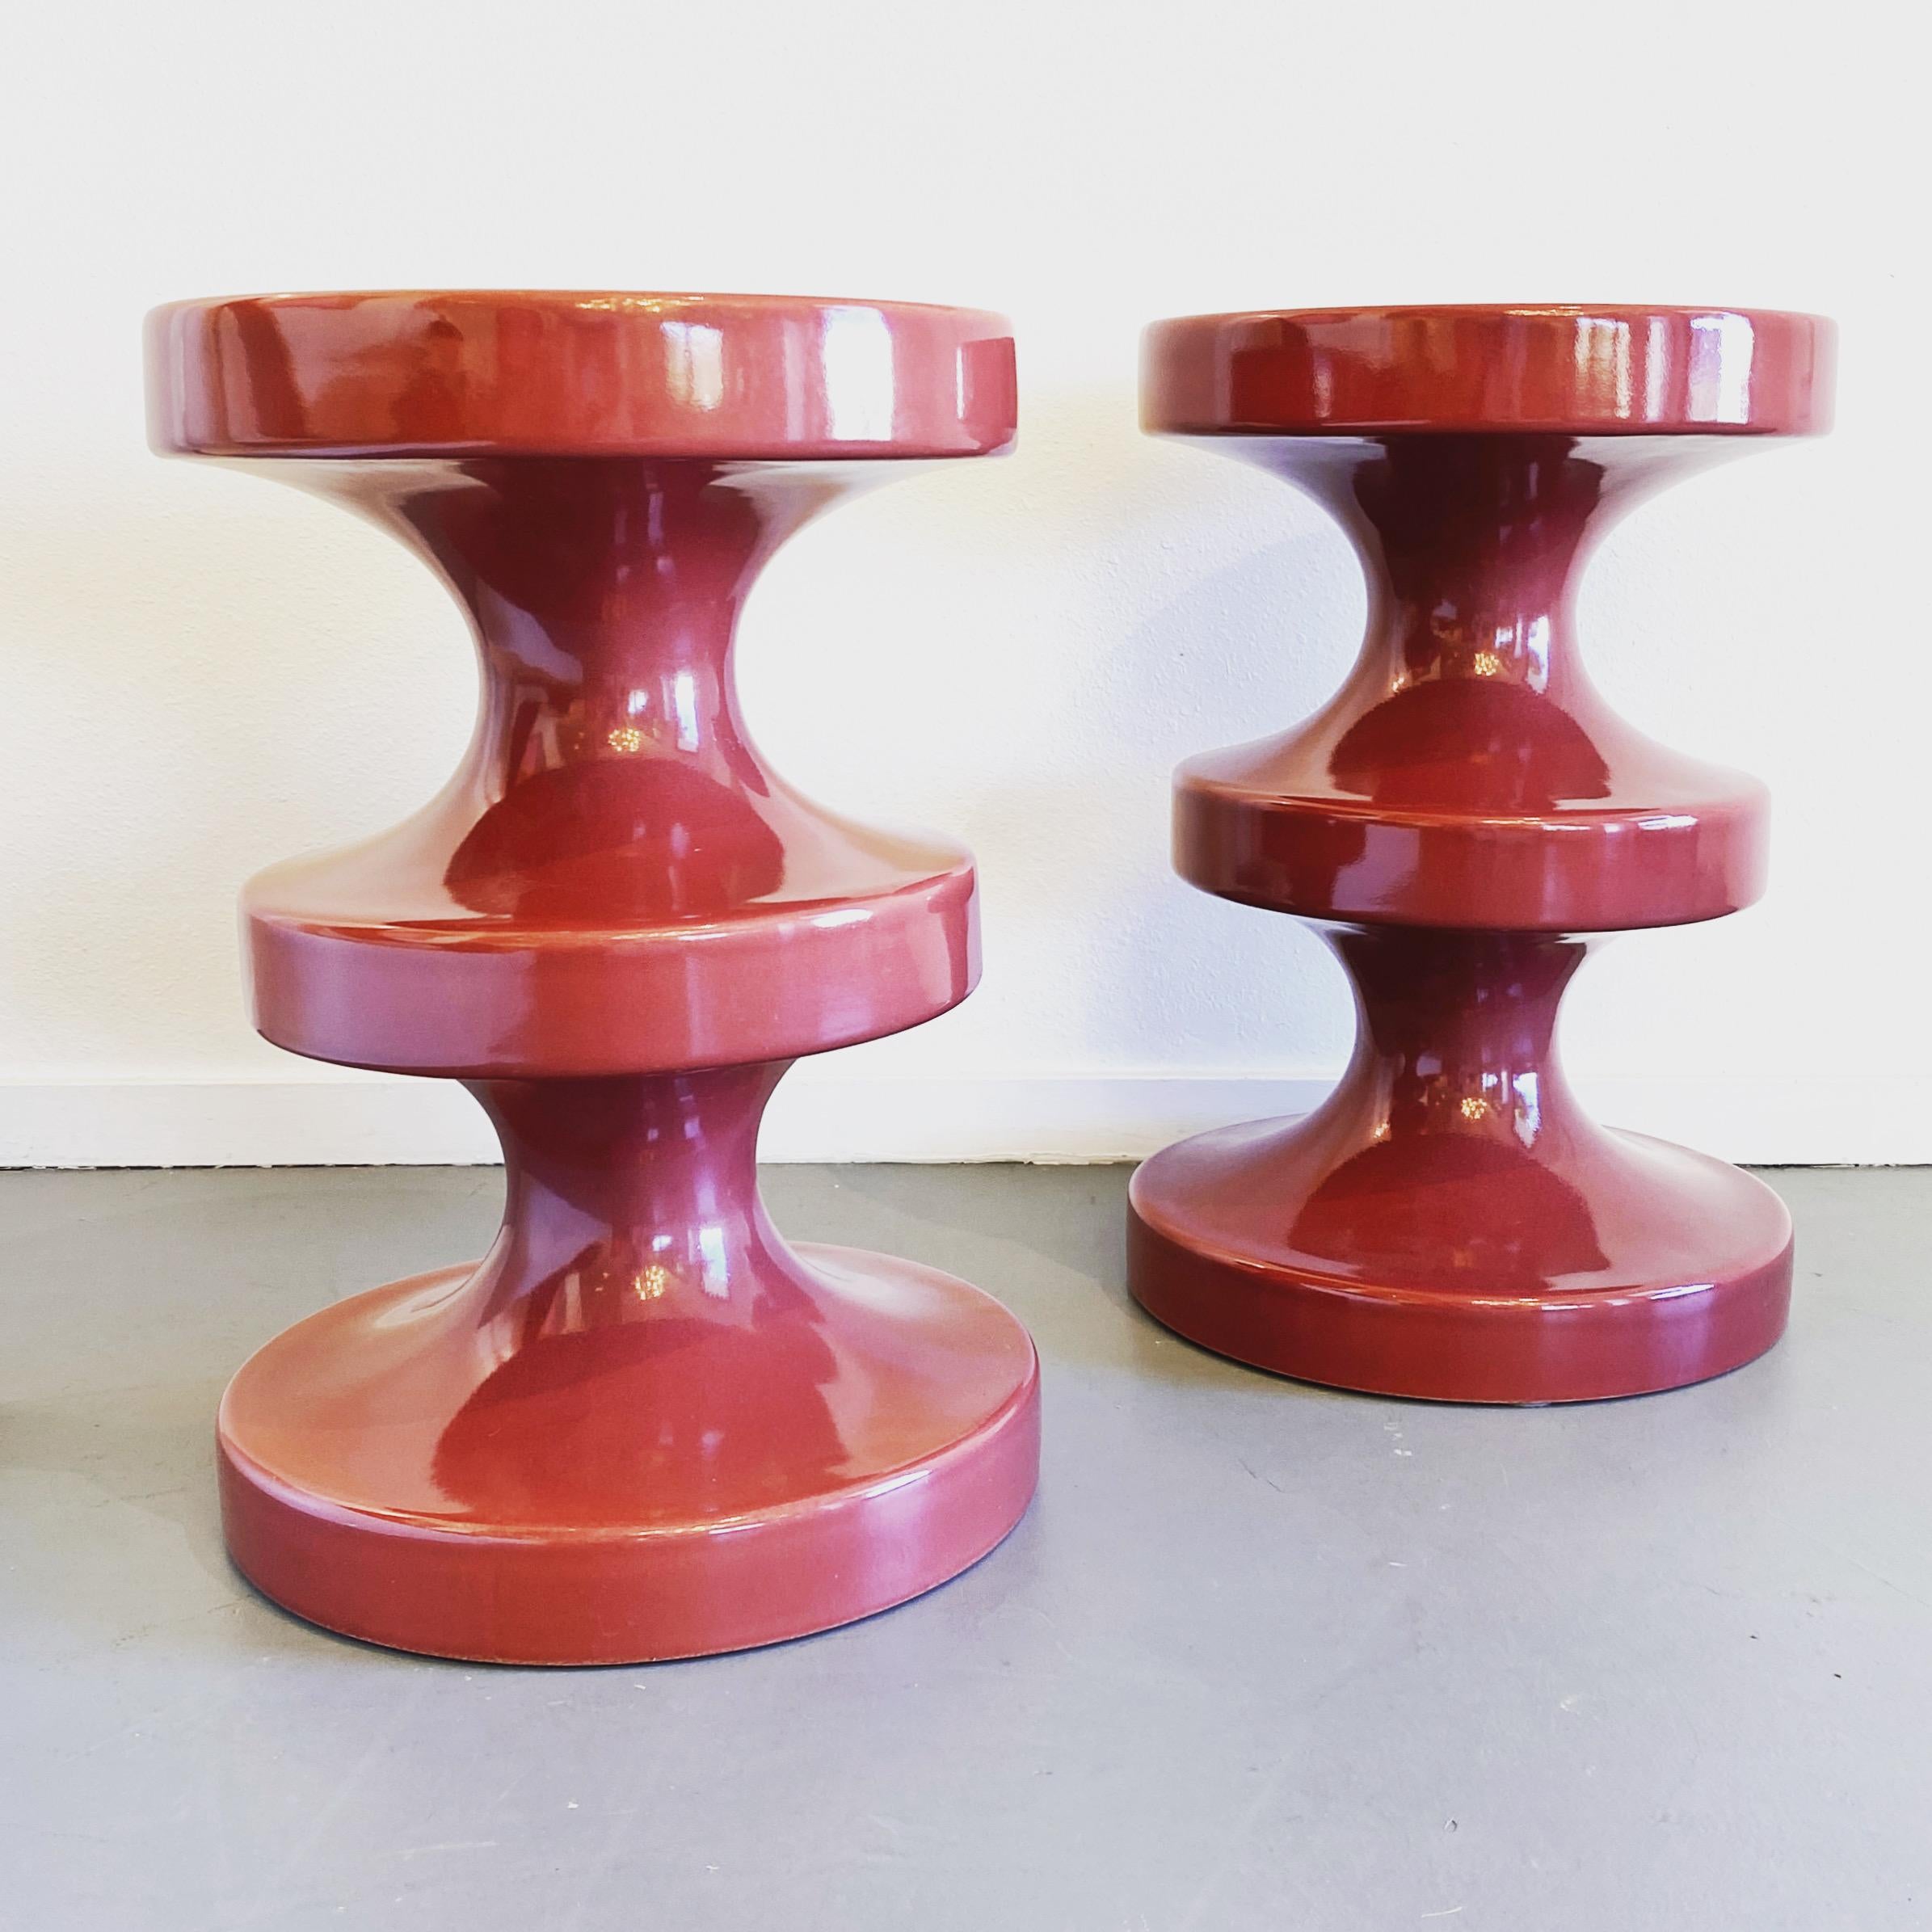 India Mahdavi France Pair Bishop Stools or Side Tables in what appears to be her Margaux color (please see photos for actual color). 1999 Design.

Each Stool measures approximately 23.6